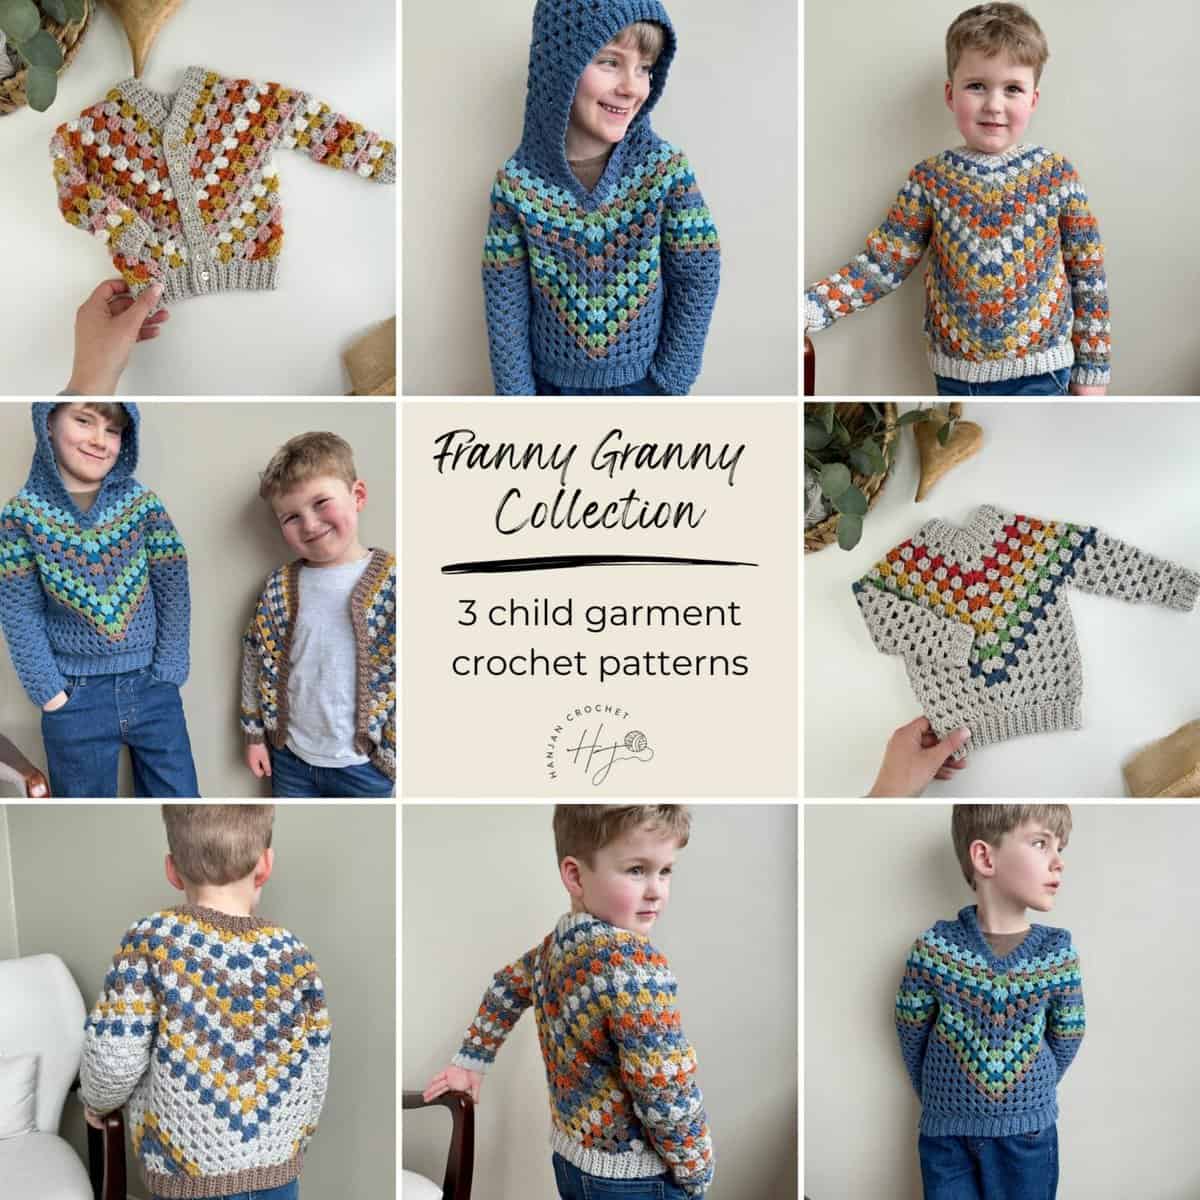 A collection of pictures of kids wearing a crocheted cardigan.